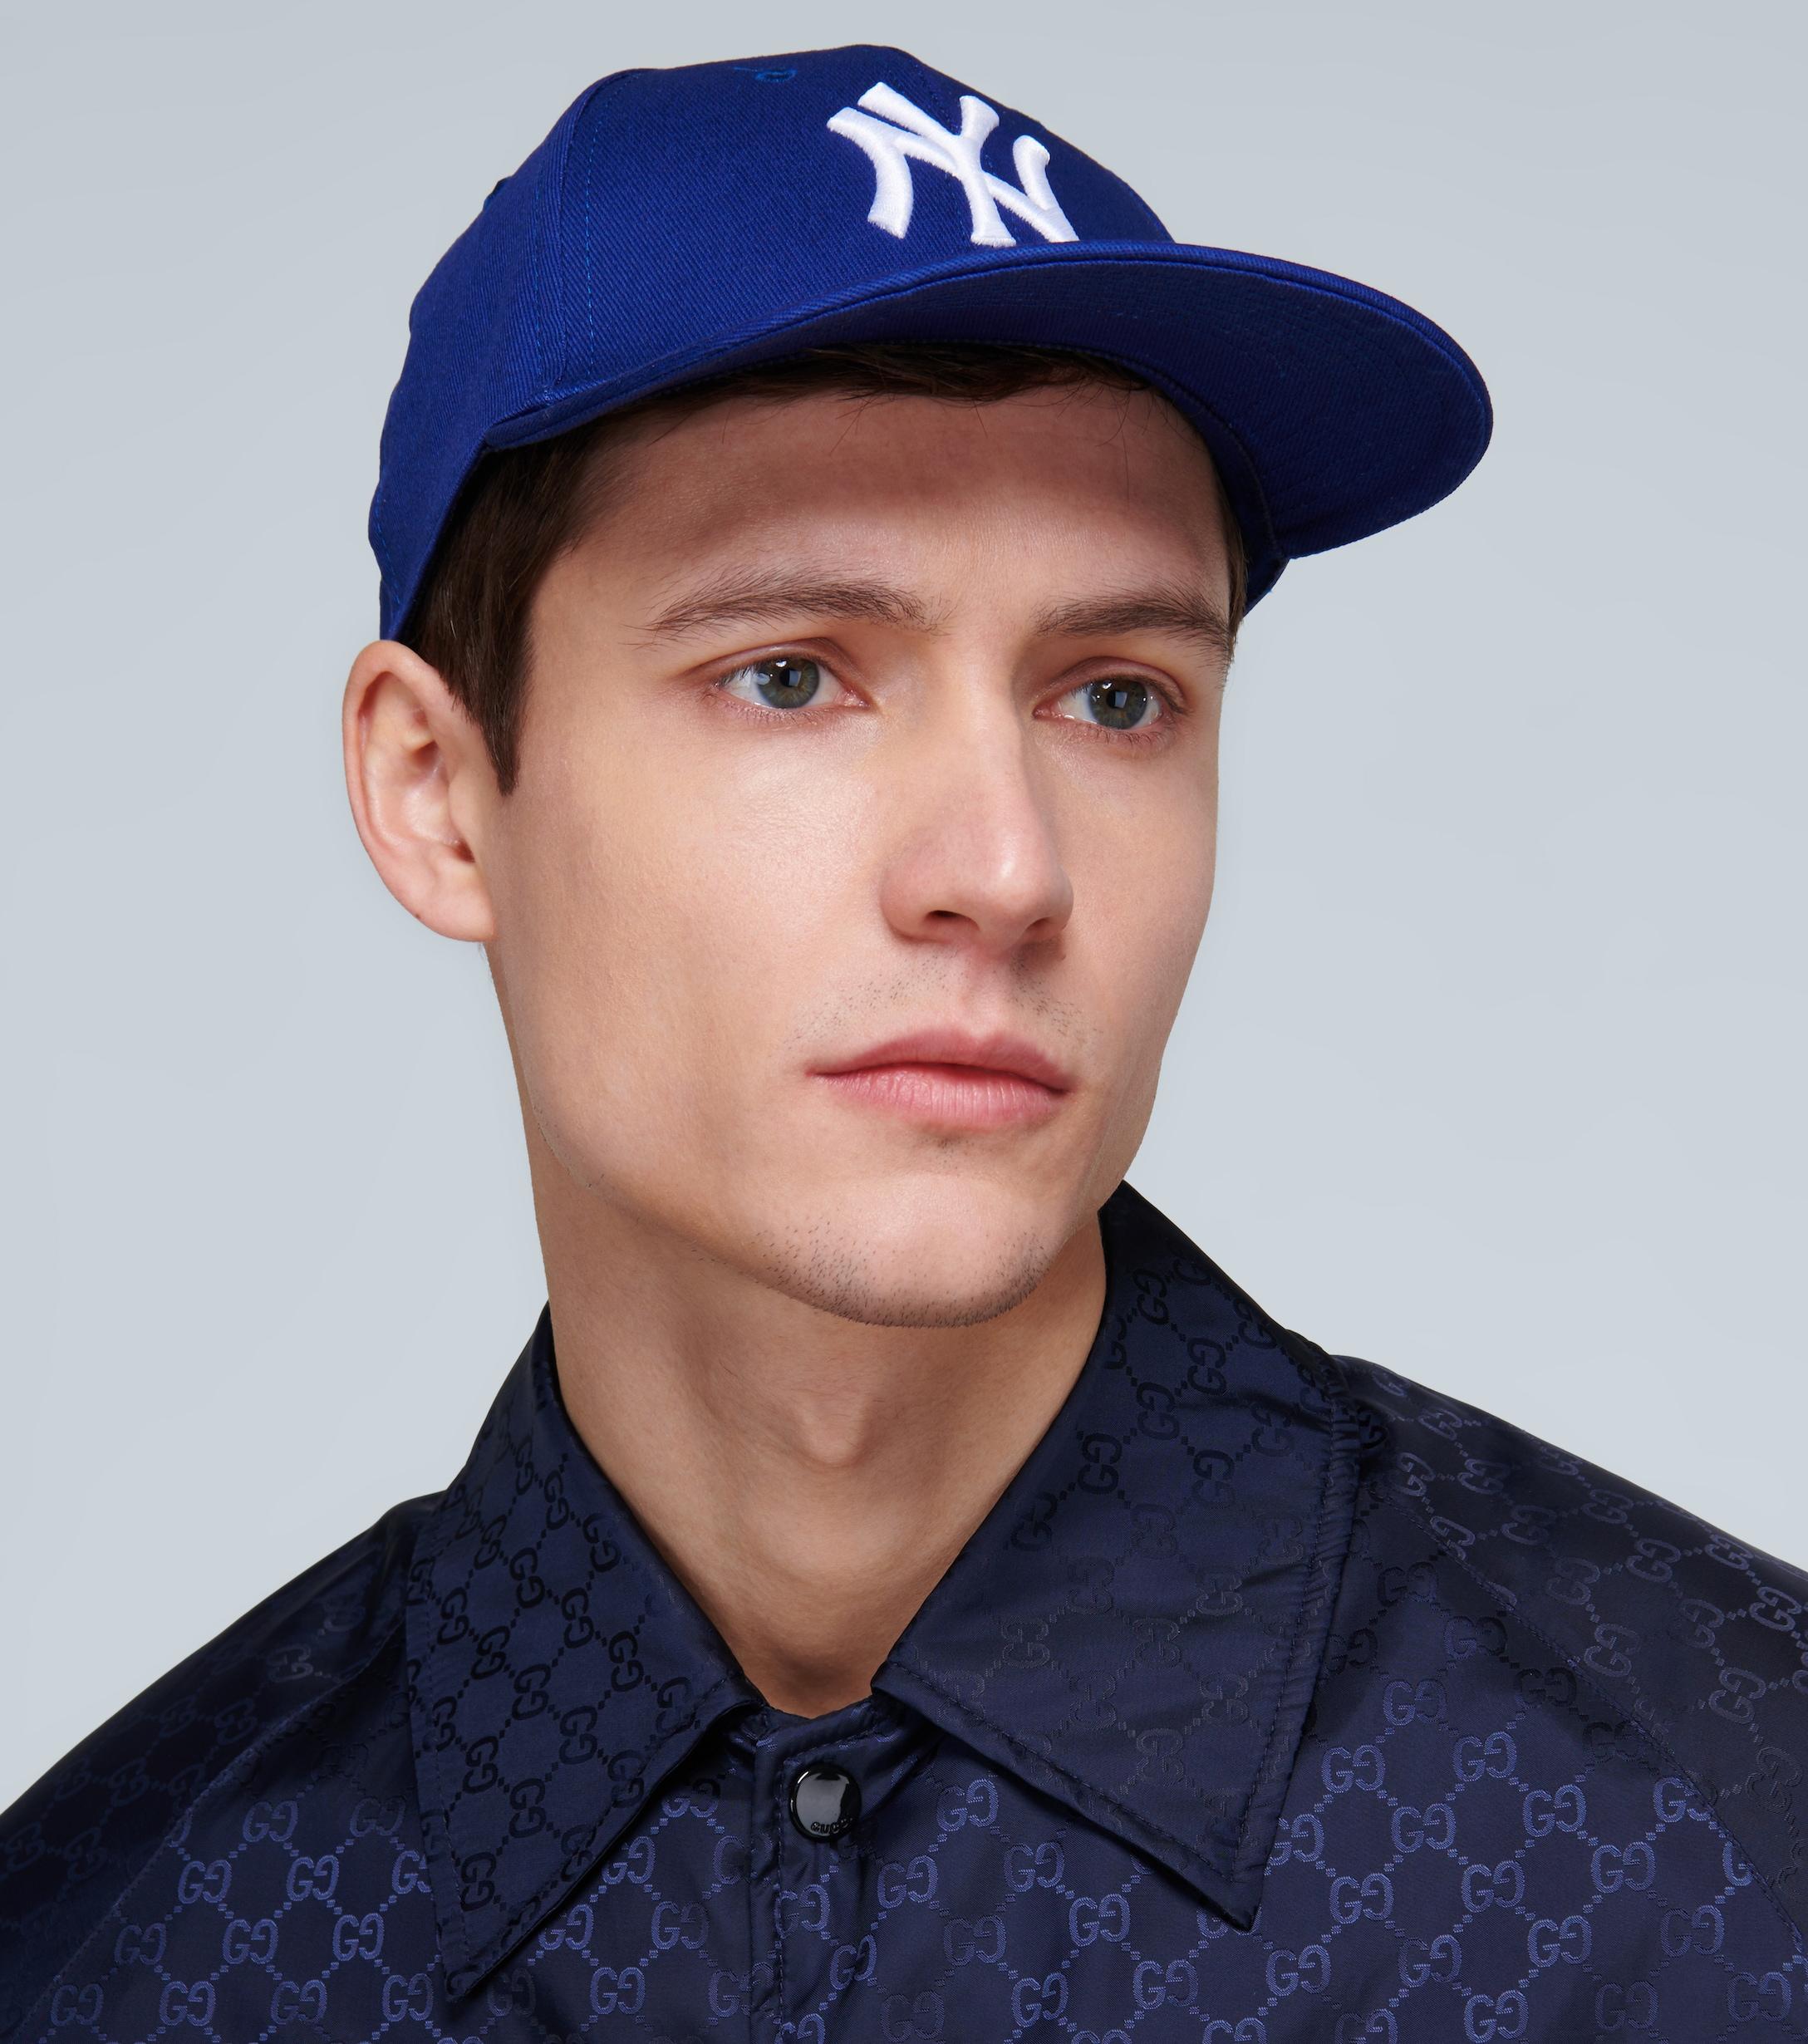 Gucci Cotton Ny Yankees Baseball Cap in Navy Blue (Blue) for Men | Lyst